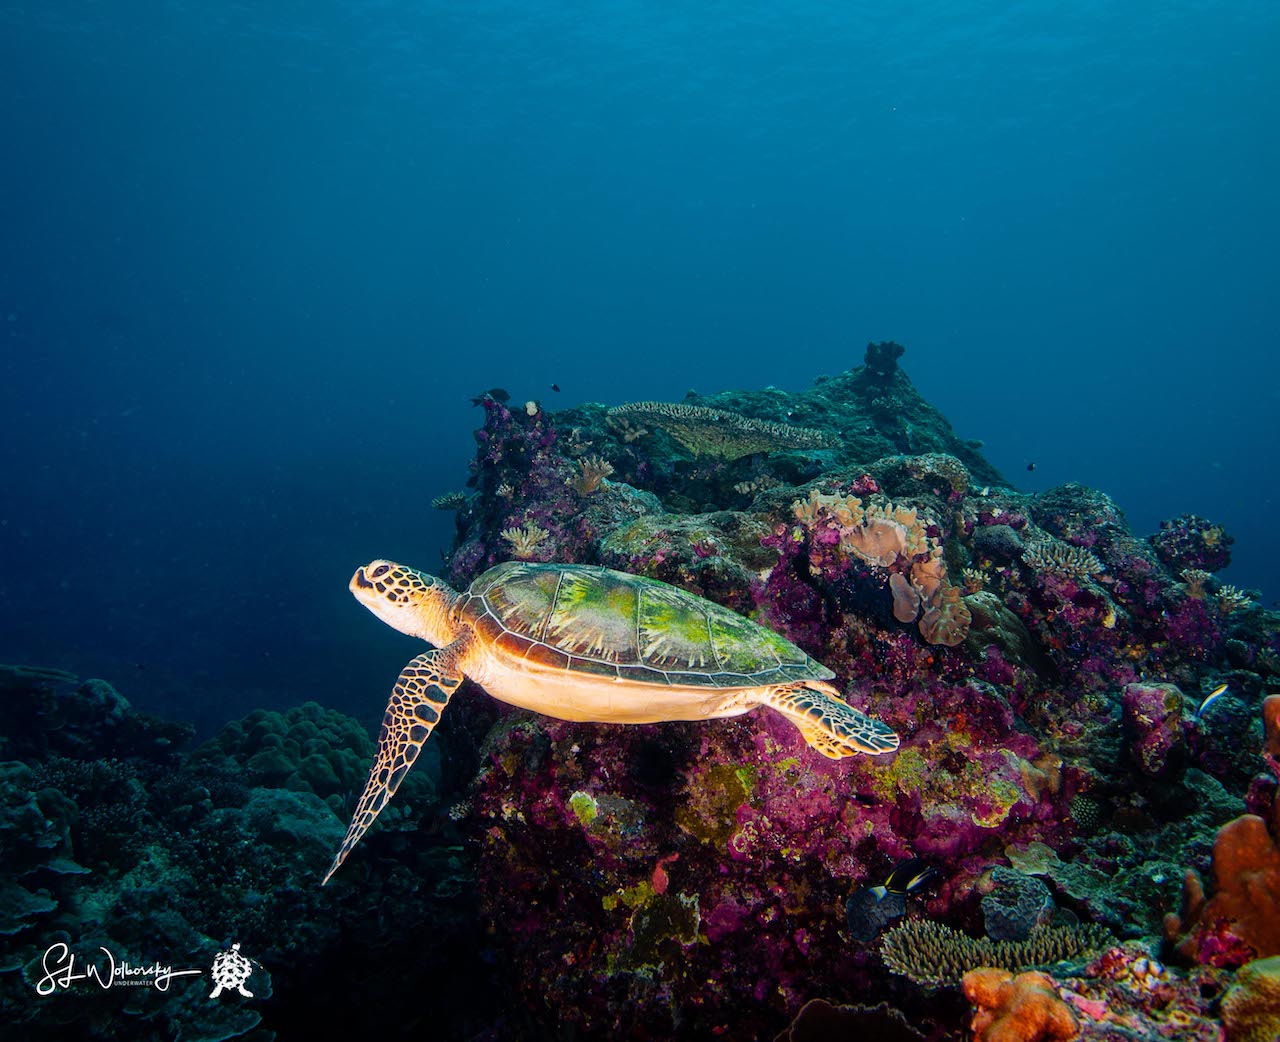 Swimming Sea Turtle in Palau by Stephen Wolborsky